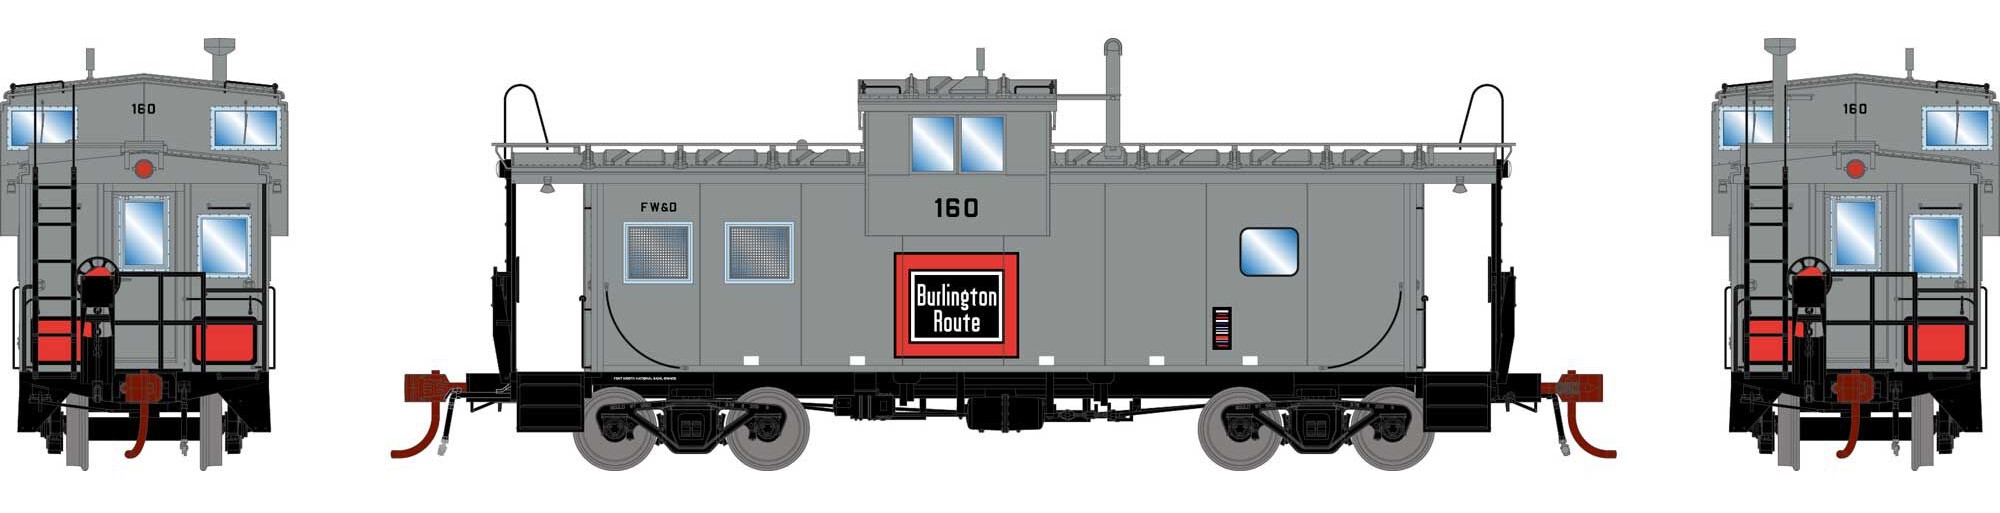 Athearn Genesis HO ATHG78572 DCC/NCE Equipped ICC Caboose With Lights Fort Worth & Dodge 'Burlington Route' FW&D #160